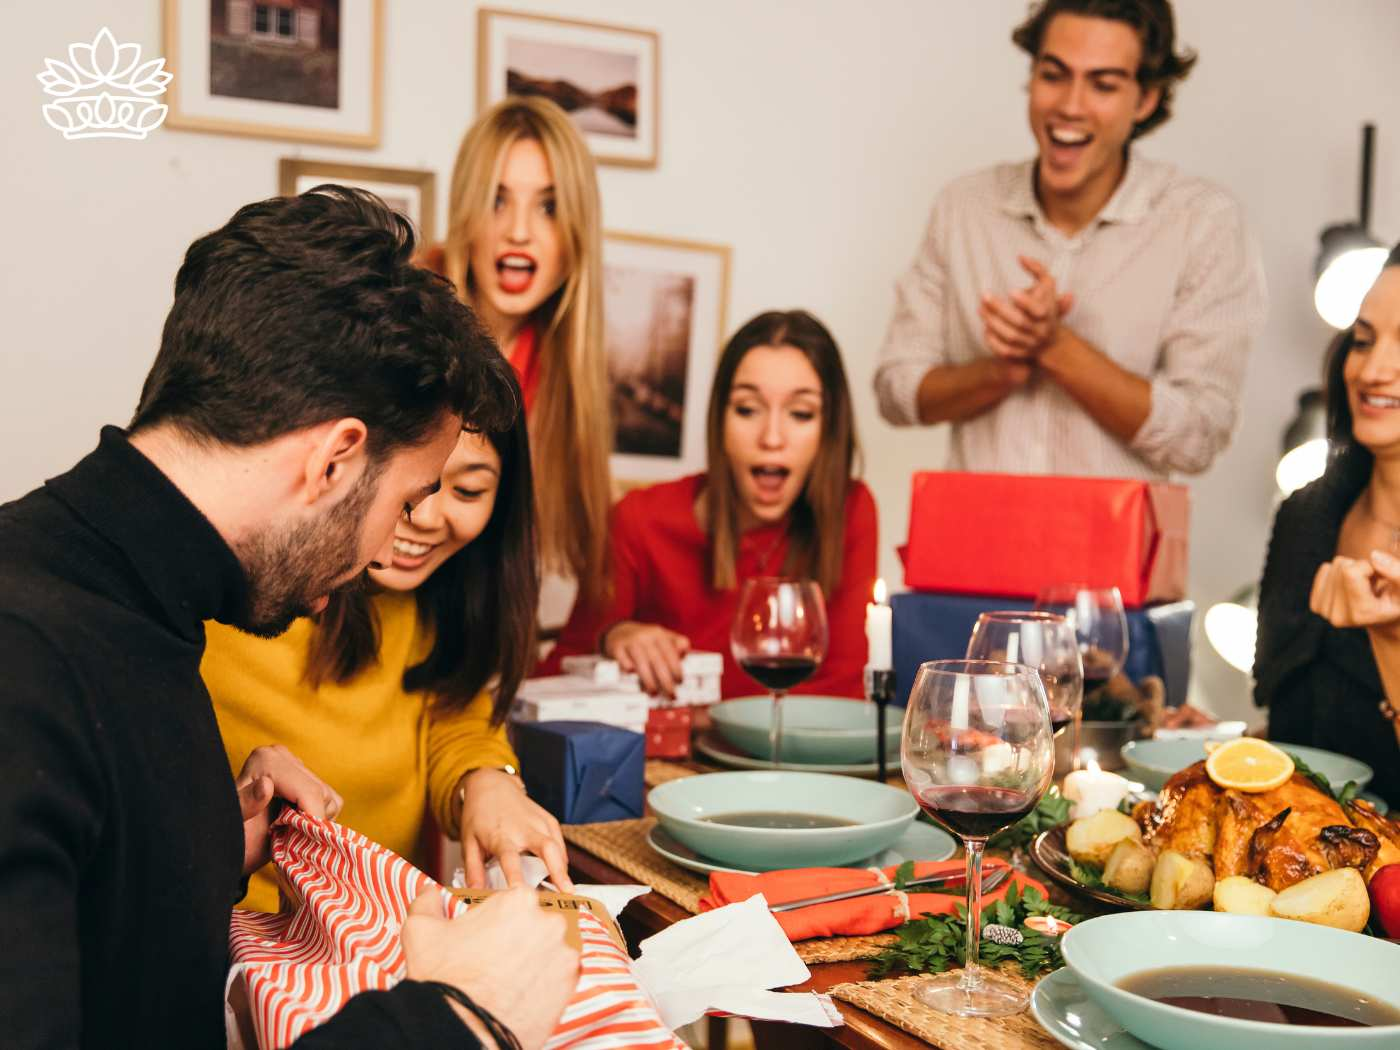 Friends gathered around a festive dinner table enjoying a surprise gift, part of the Festive Season Collection delivered with heart by Fabulous Flowers and Gifts. This scene captures a country-wide tradition where people from various parts of the world tend to attend online parties, discovering joy in giving presents, expected to be sold extensively, providing access to happiness without spending much money among strangers.